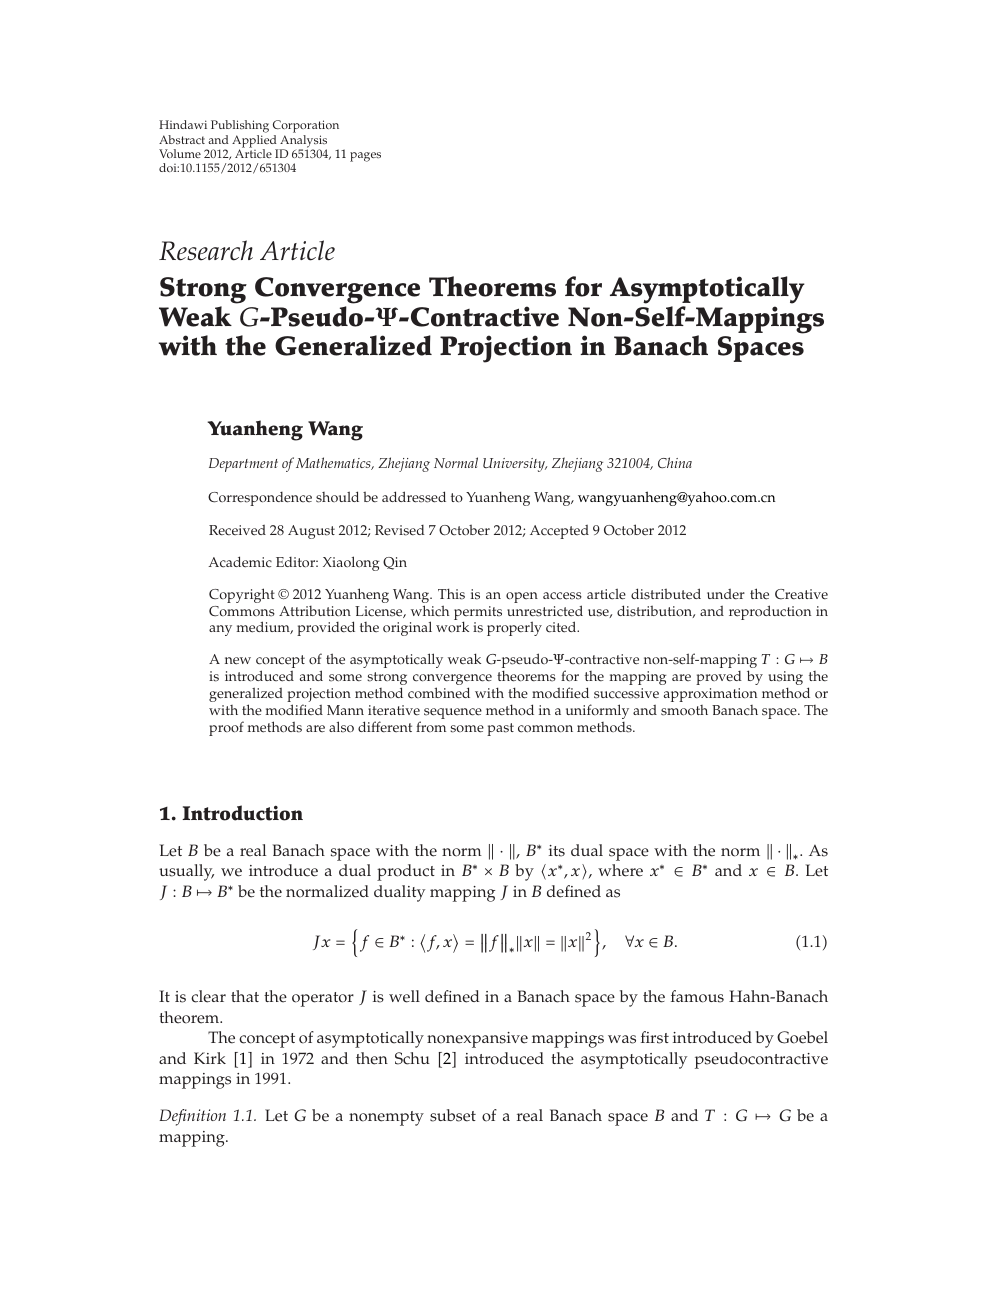 Strong Convergence Theorems For Asymptotically Weak G Pseudo Ps Contractive Non Self Mappings With The Generalized Projection In Banach Spaces Topic Of Research Paper In Mathematics Download Scholarly Article Pdf And Read For